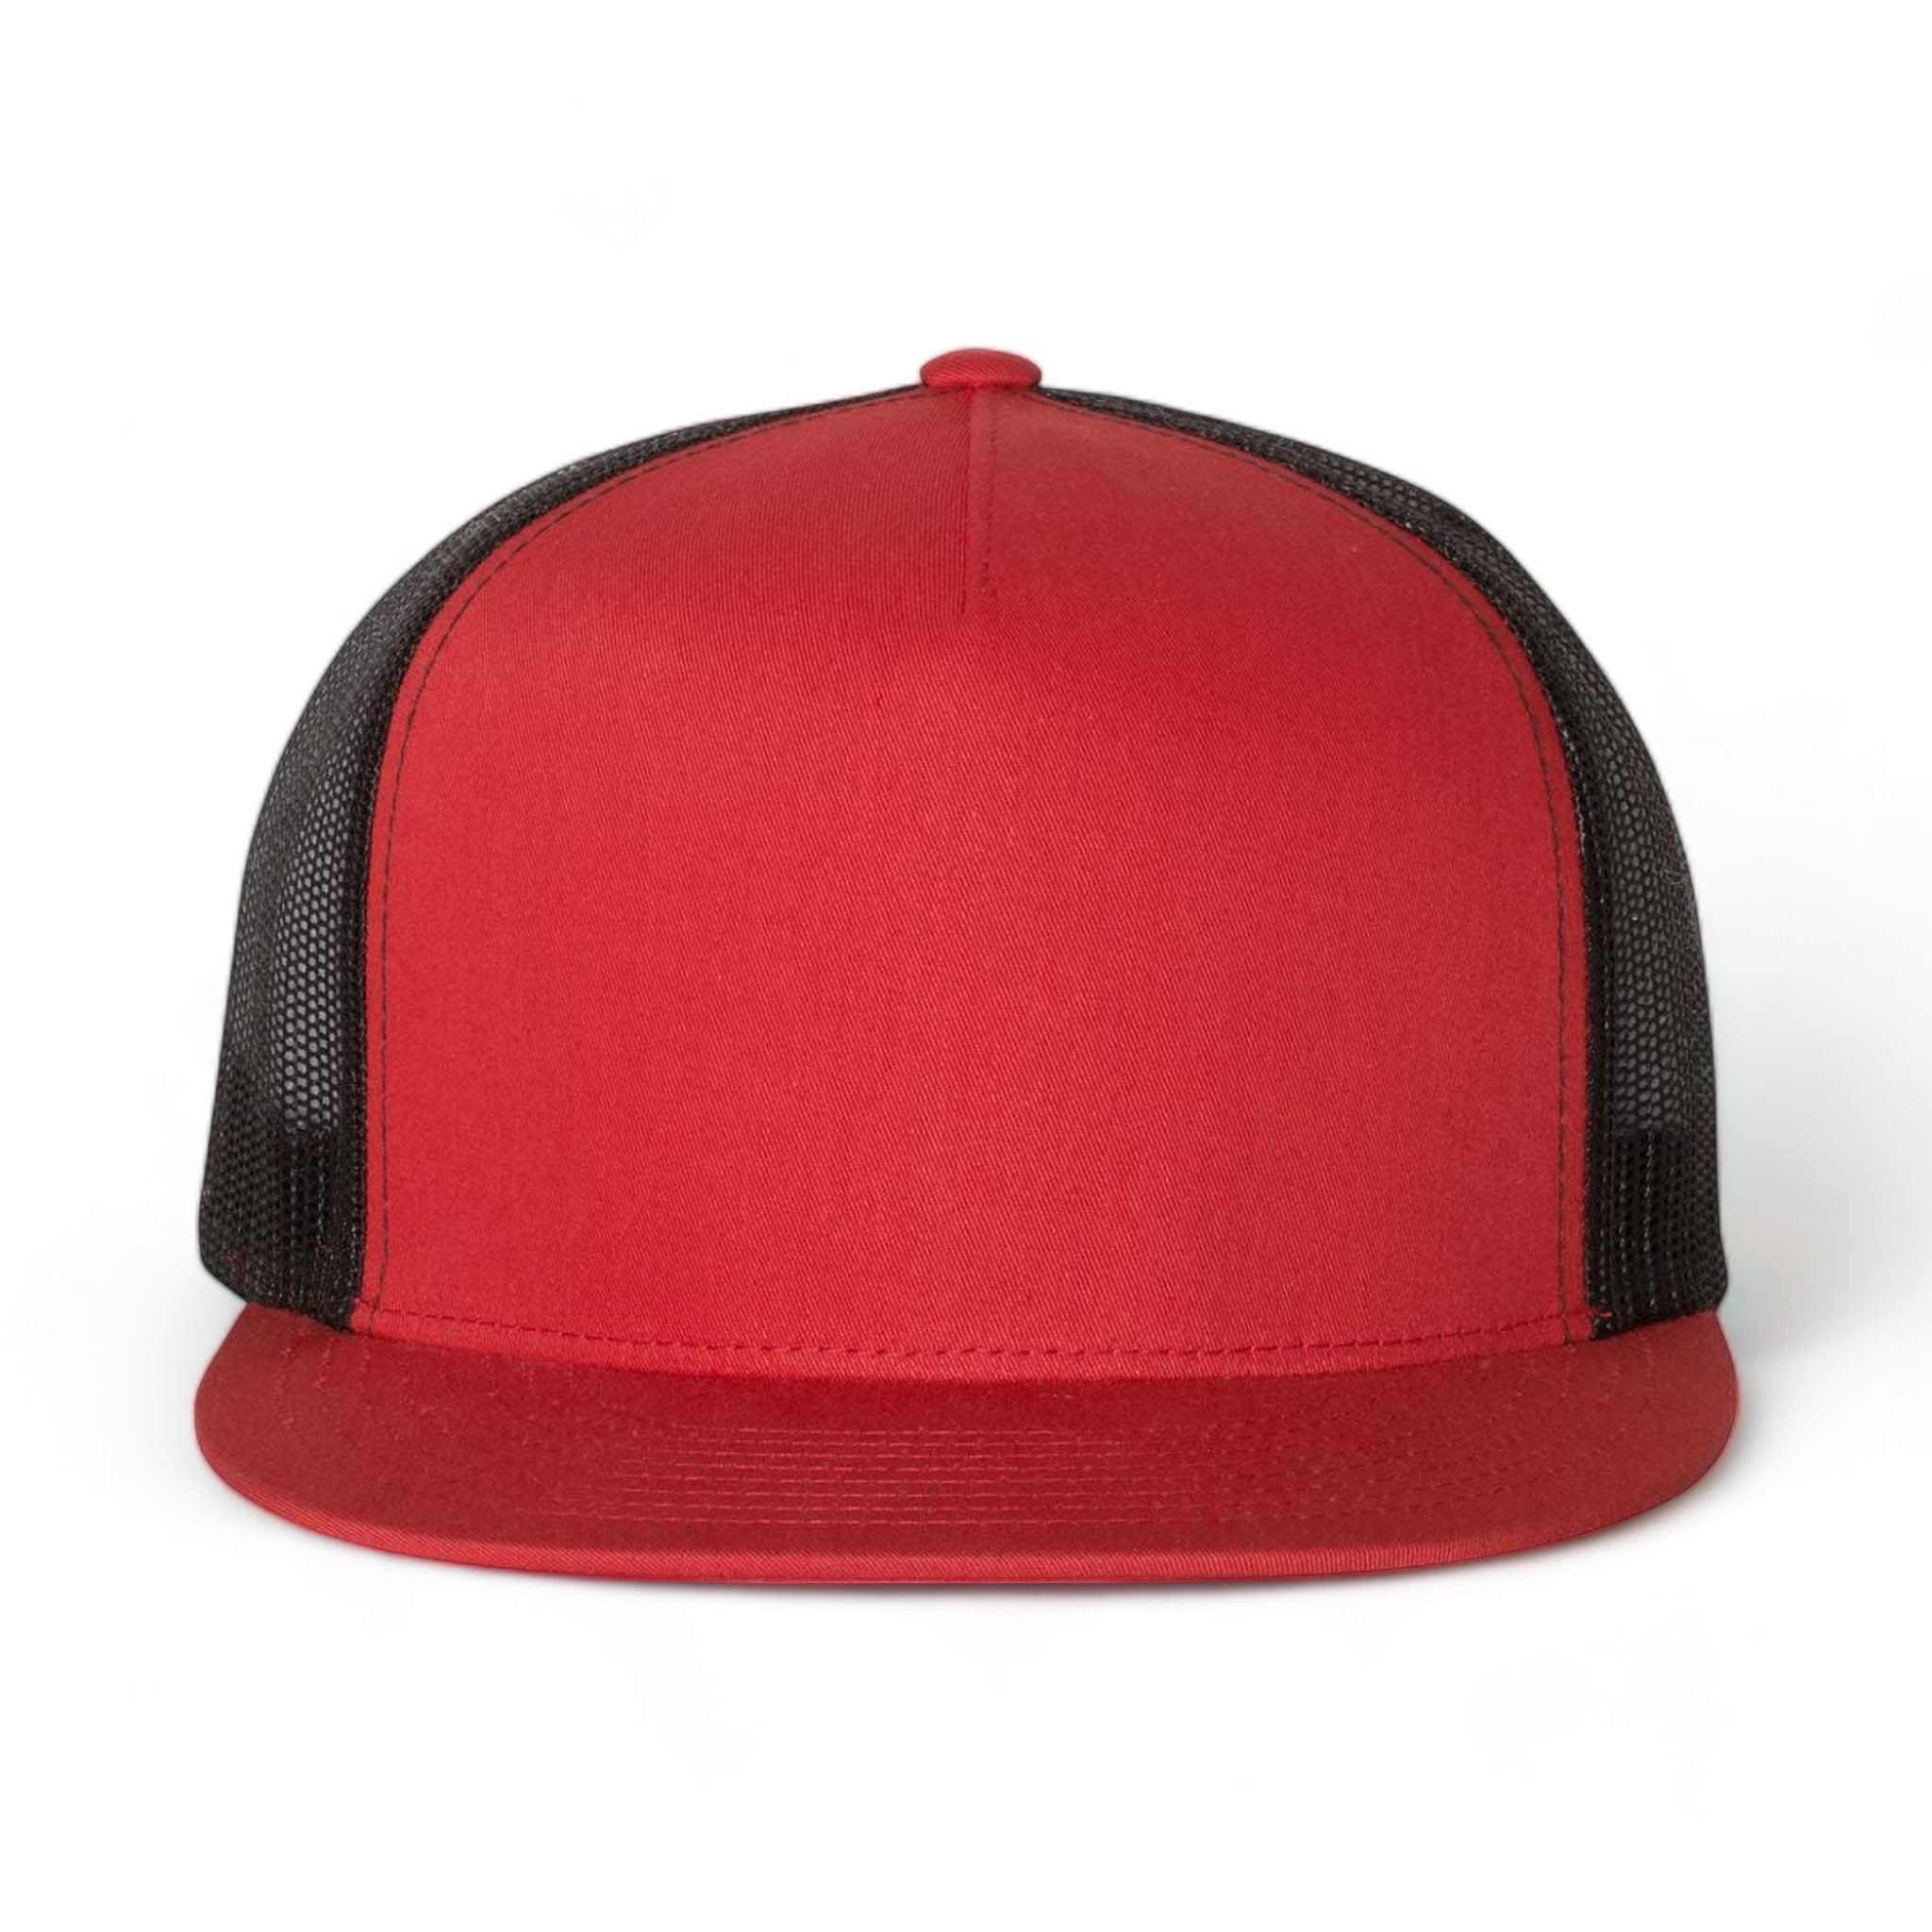 Front view of YP Classics 6006 custom hat in red and black